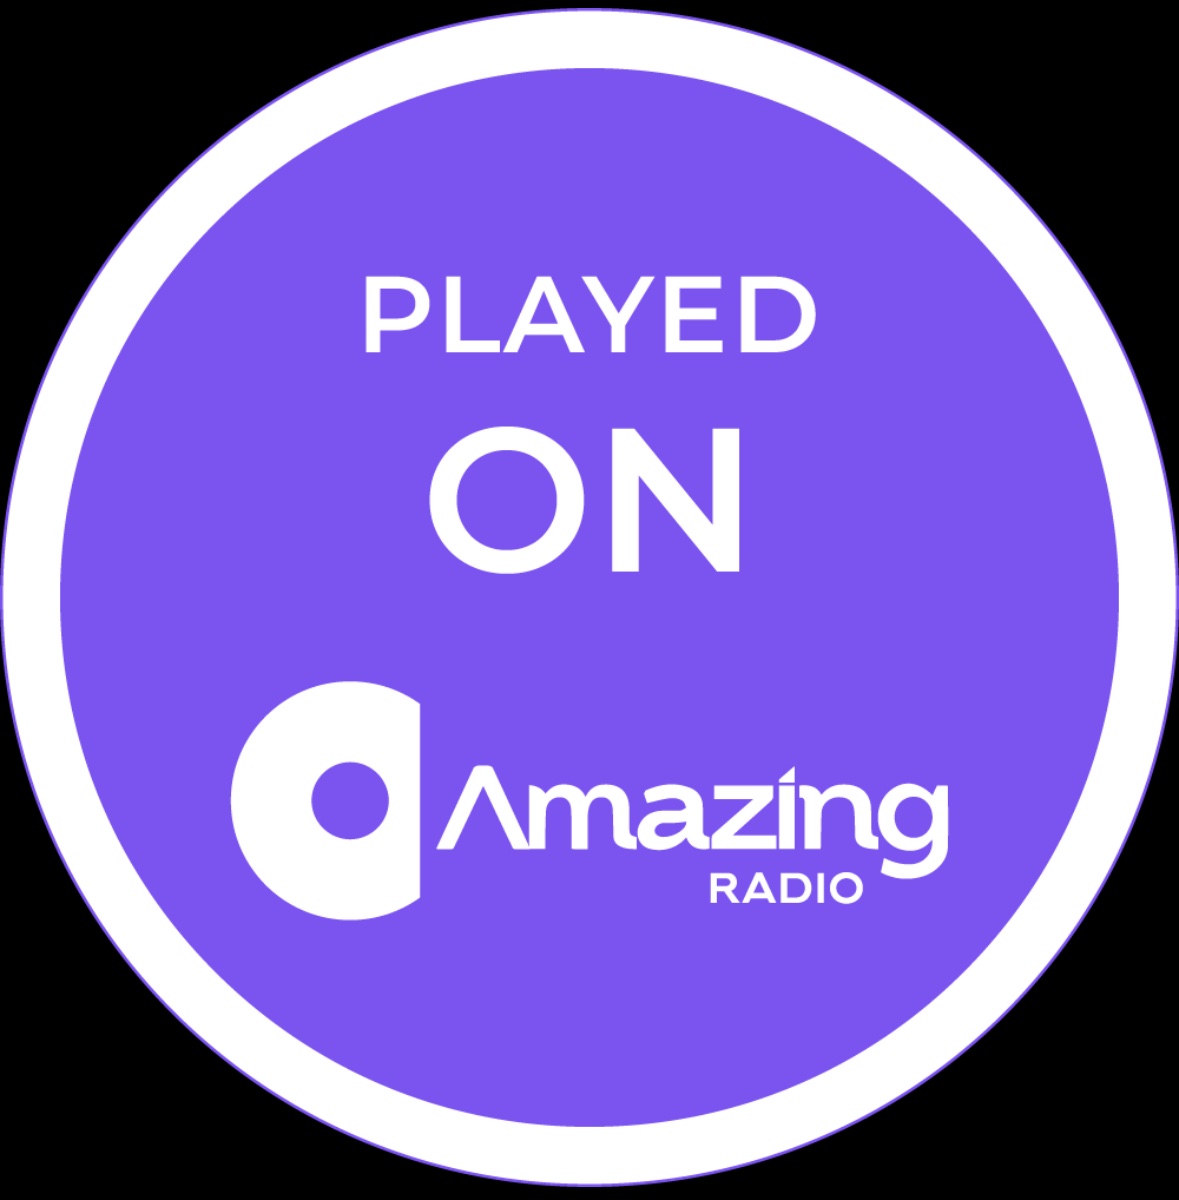 Thank you @amazingradio and Team for spinning ‘YOU & I’ this am!